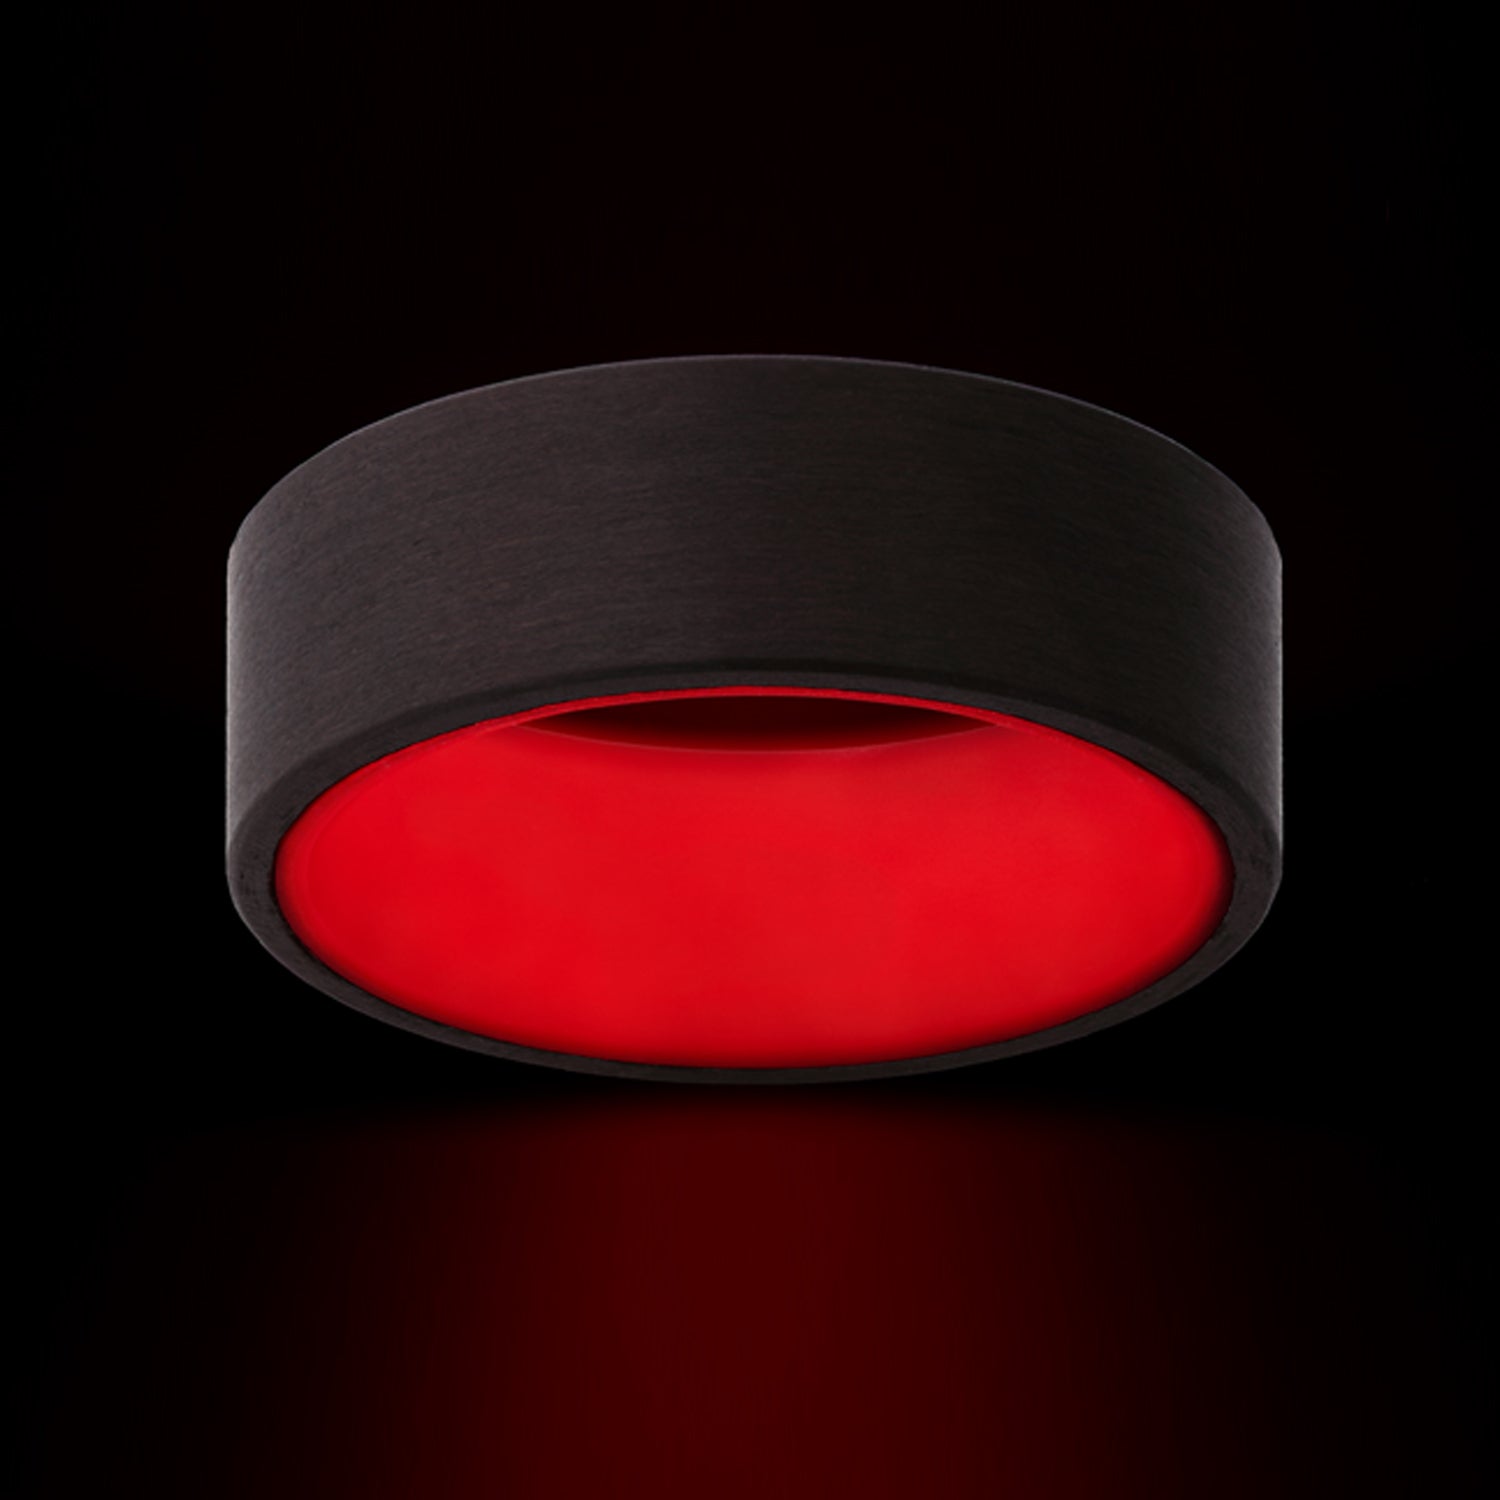 Glow in the Dark Carbon Fiber Wedding Band with Contrasting Red Center